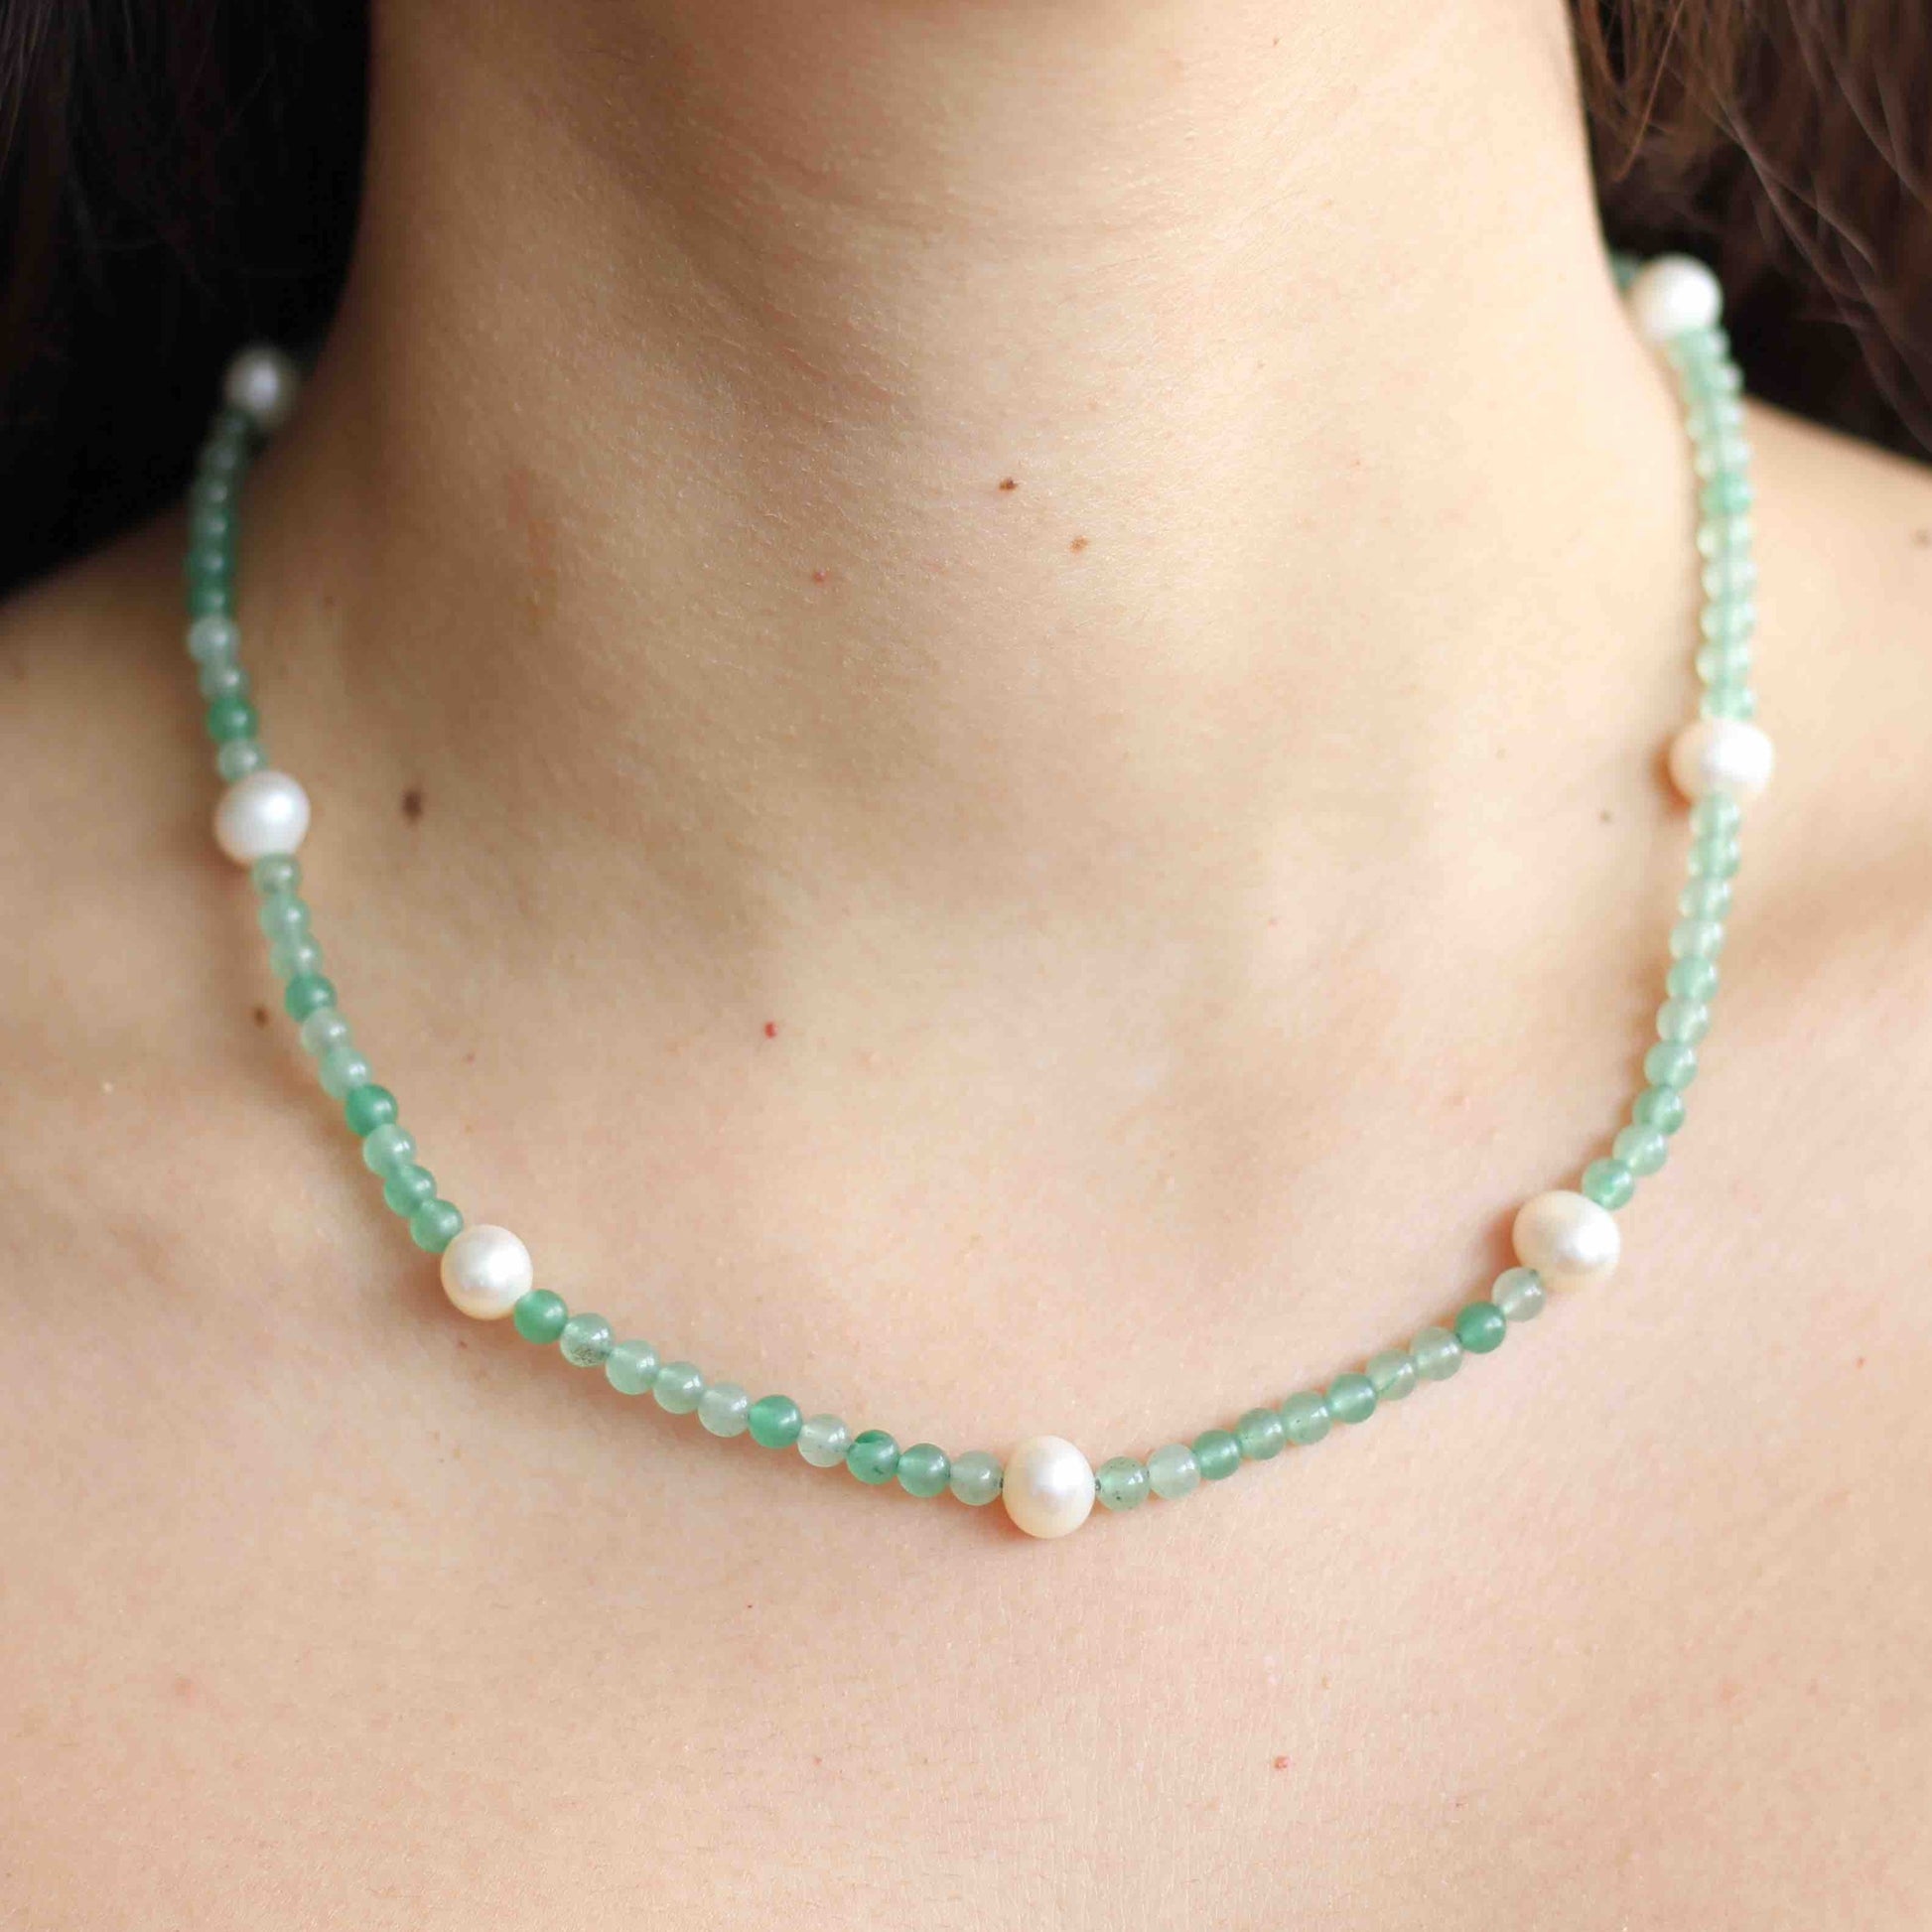 Green Aventurine Pearl Necklace, Pearl Necklace, Green Aventurine Necklace, Gemstone Necklace, Necklace for Women, Green Gemstone